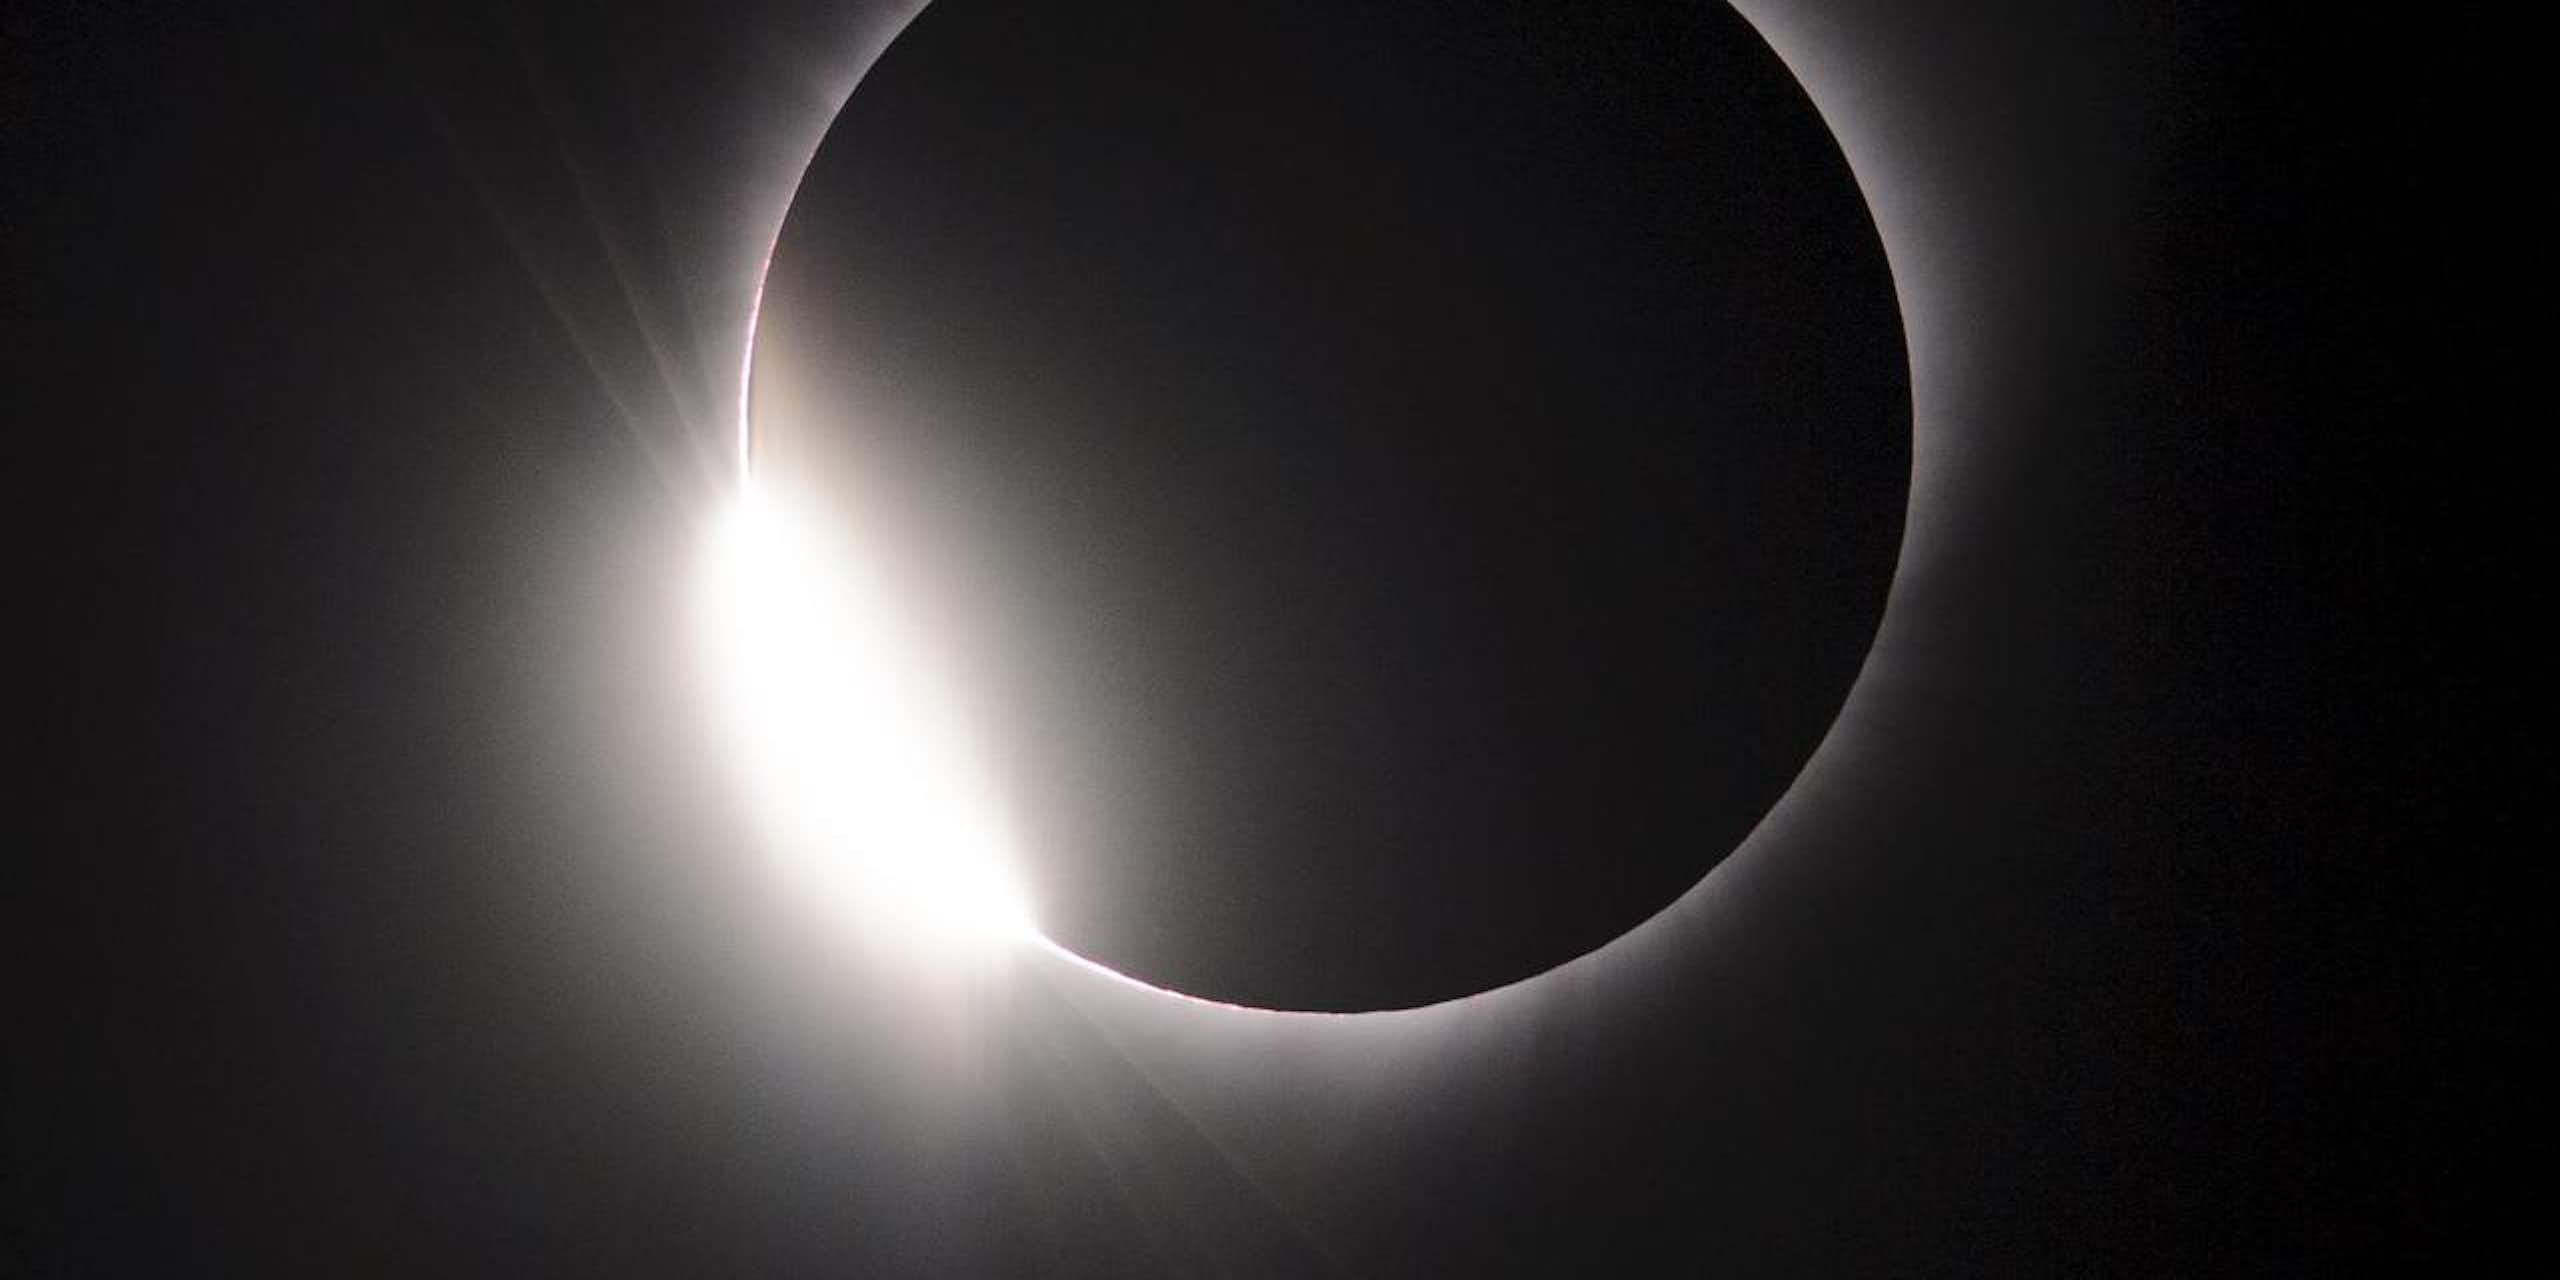 a black circle surrounded by a white halo of light against a dark background